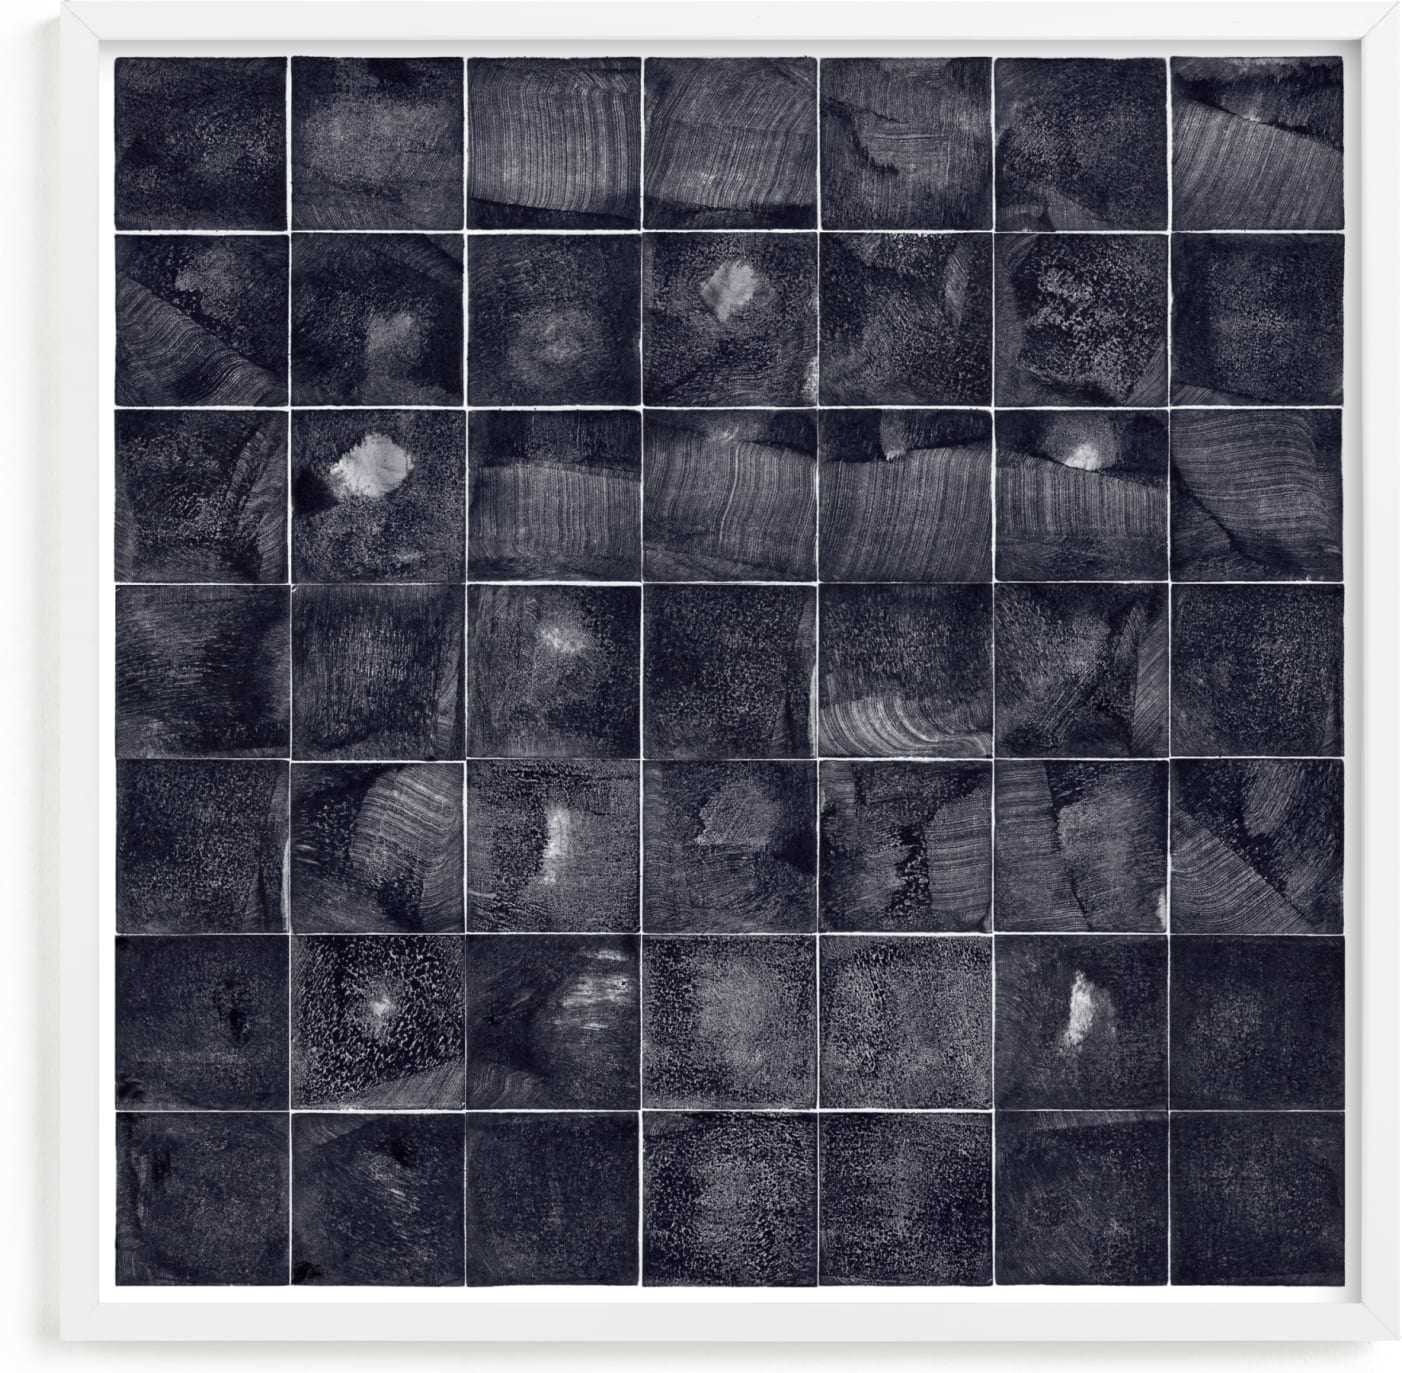 This is a black and white art by Kathy Van Torne called Relief Print Squares.